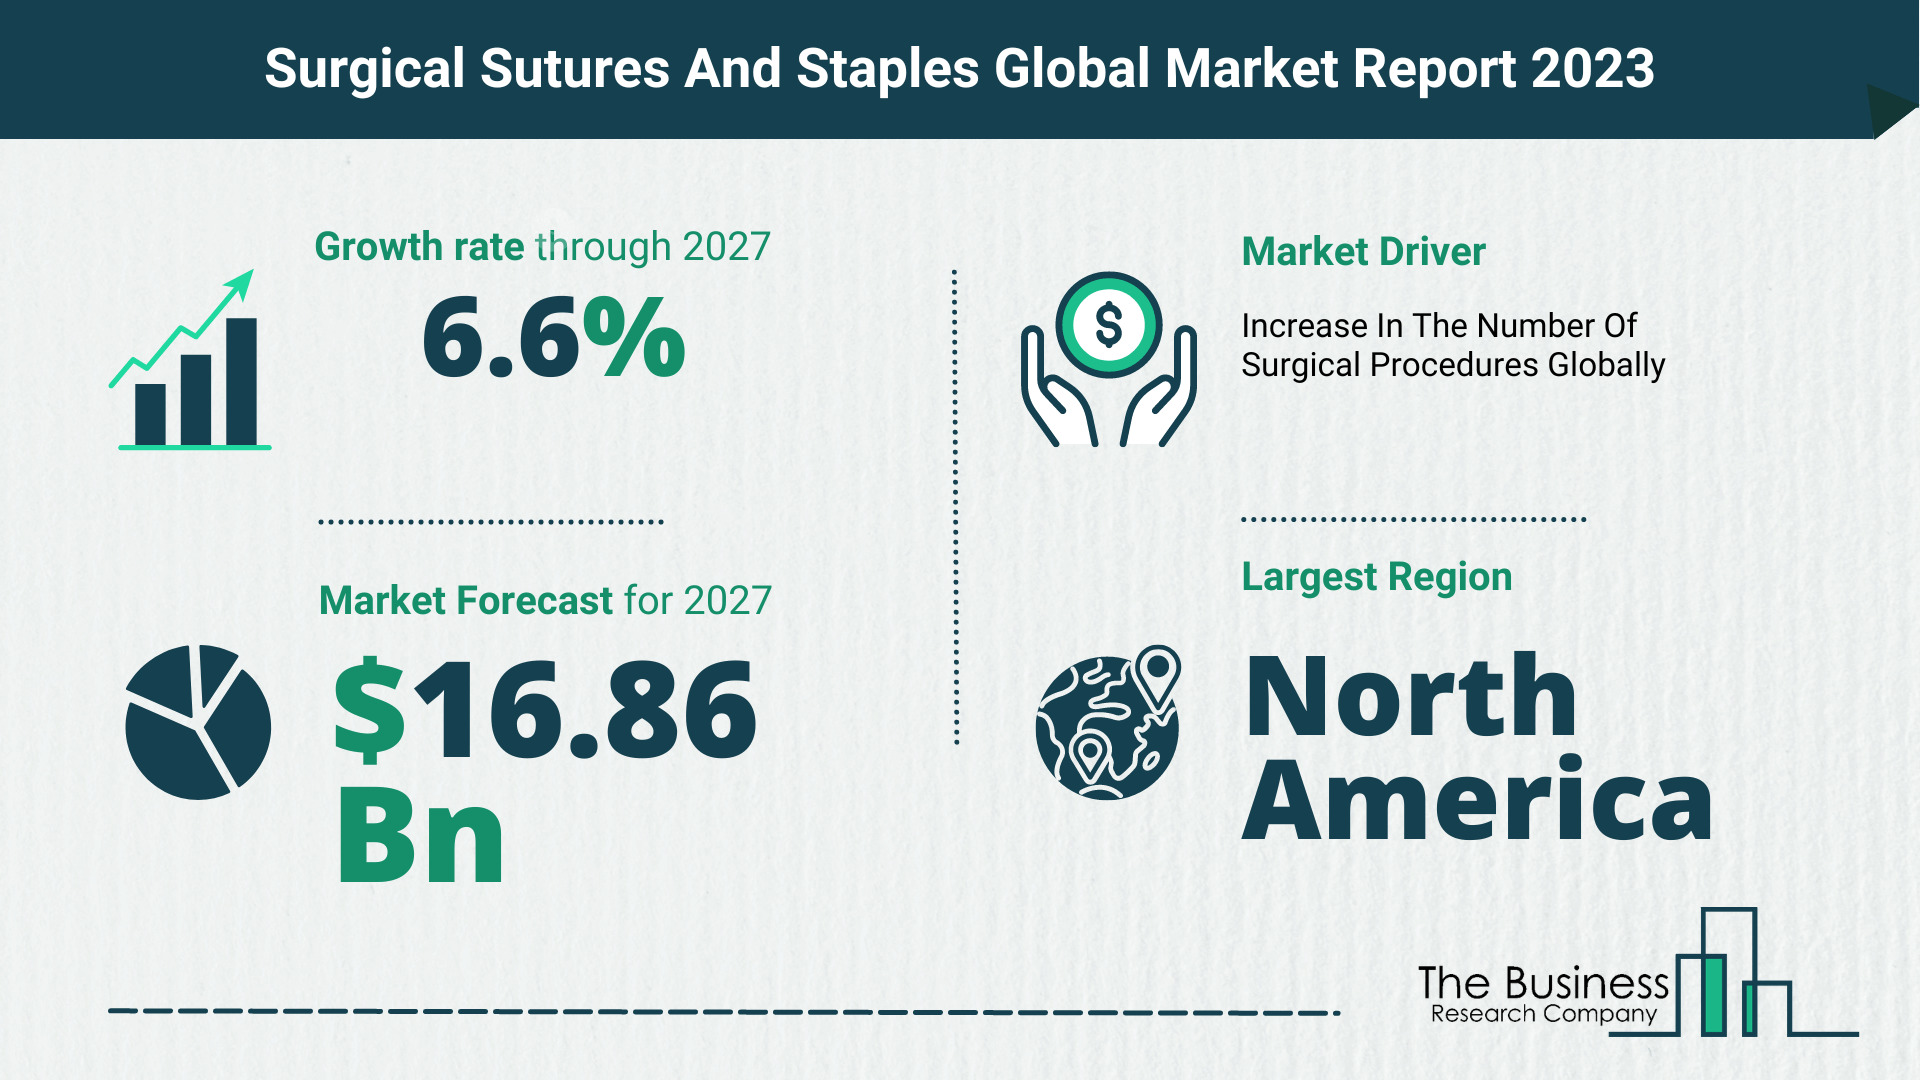 What Will The Surgical Sutures And Staples Market Look Like In 2023?